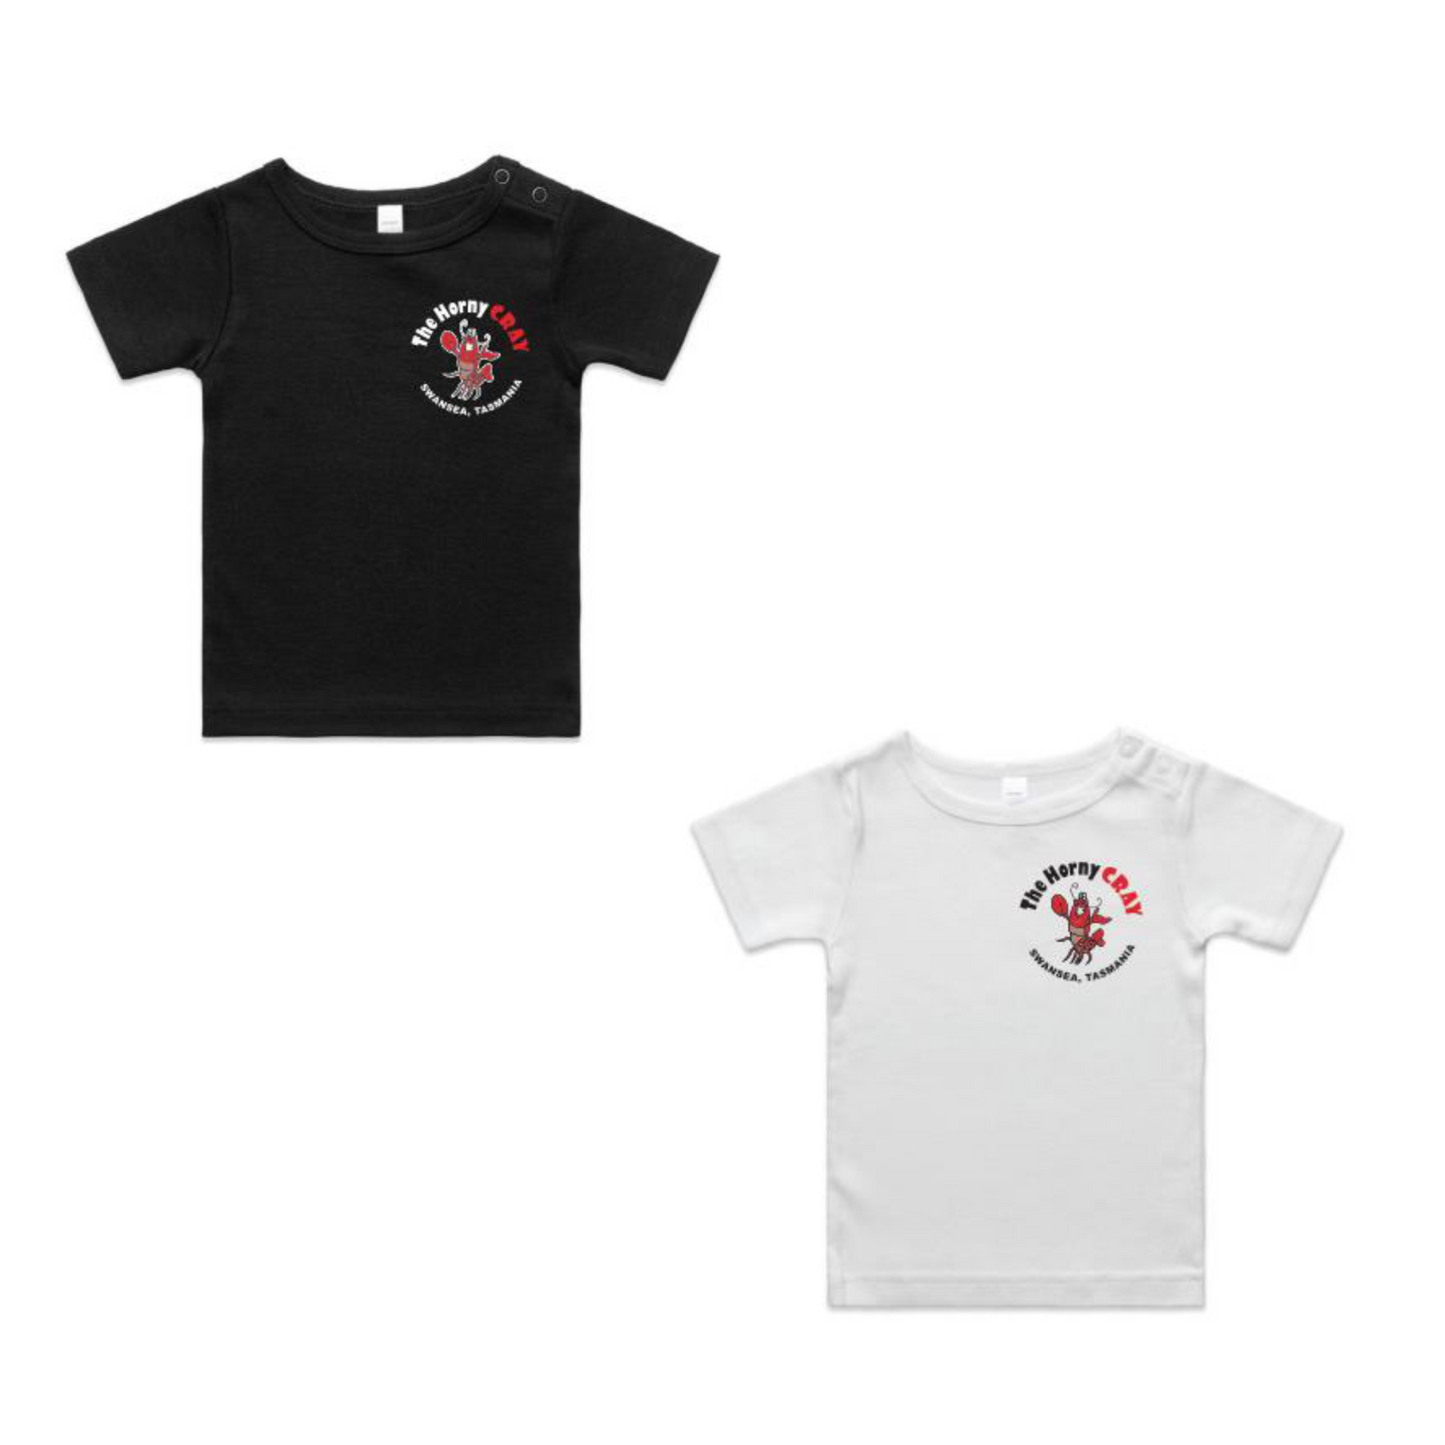 The Horny Cray Infant Tees